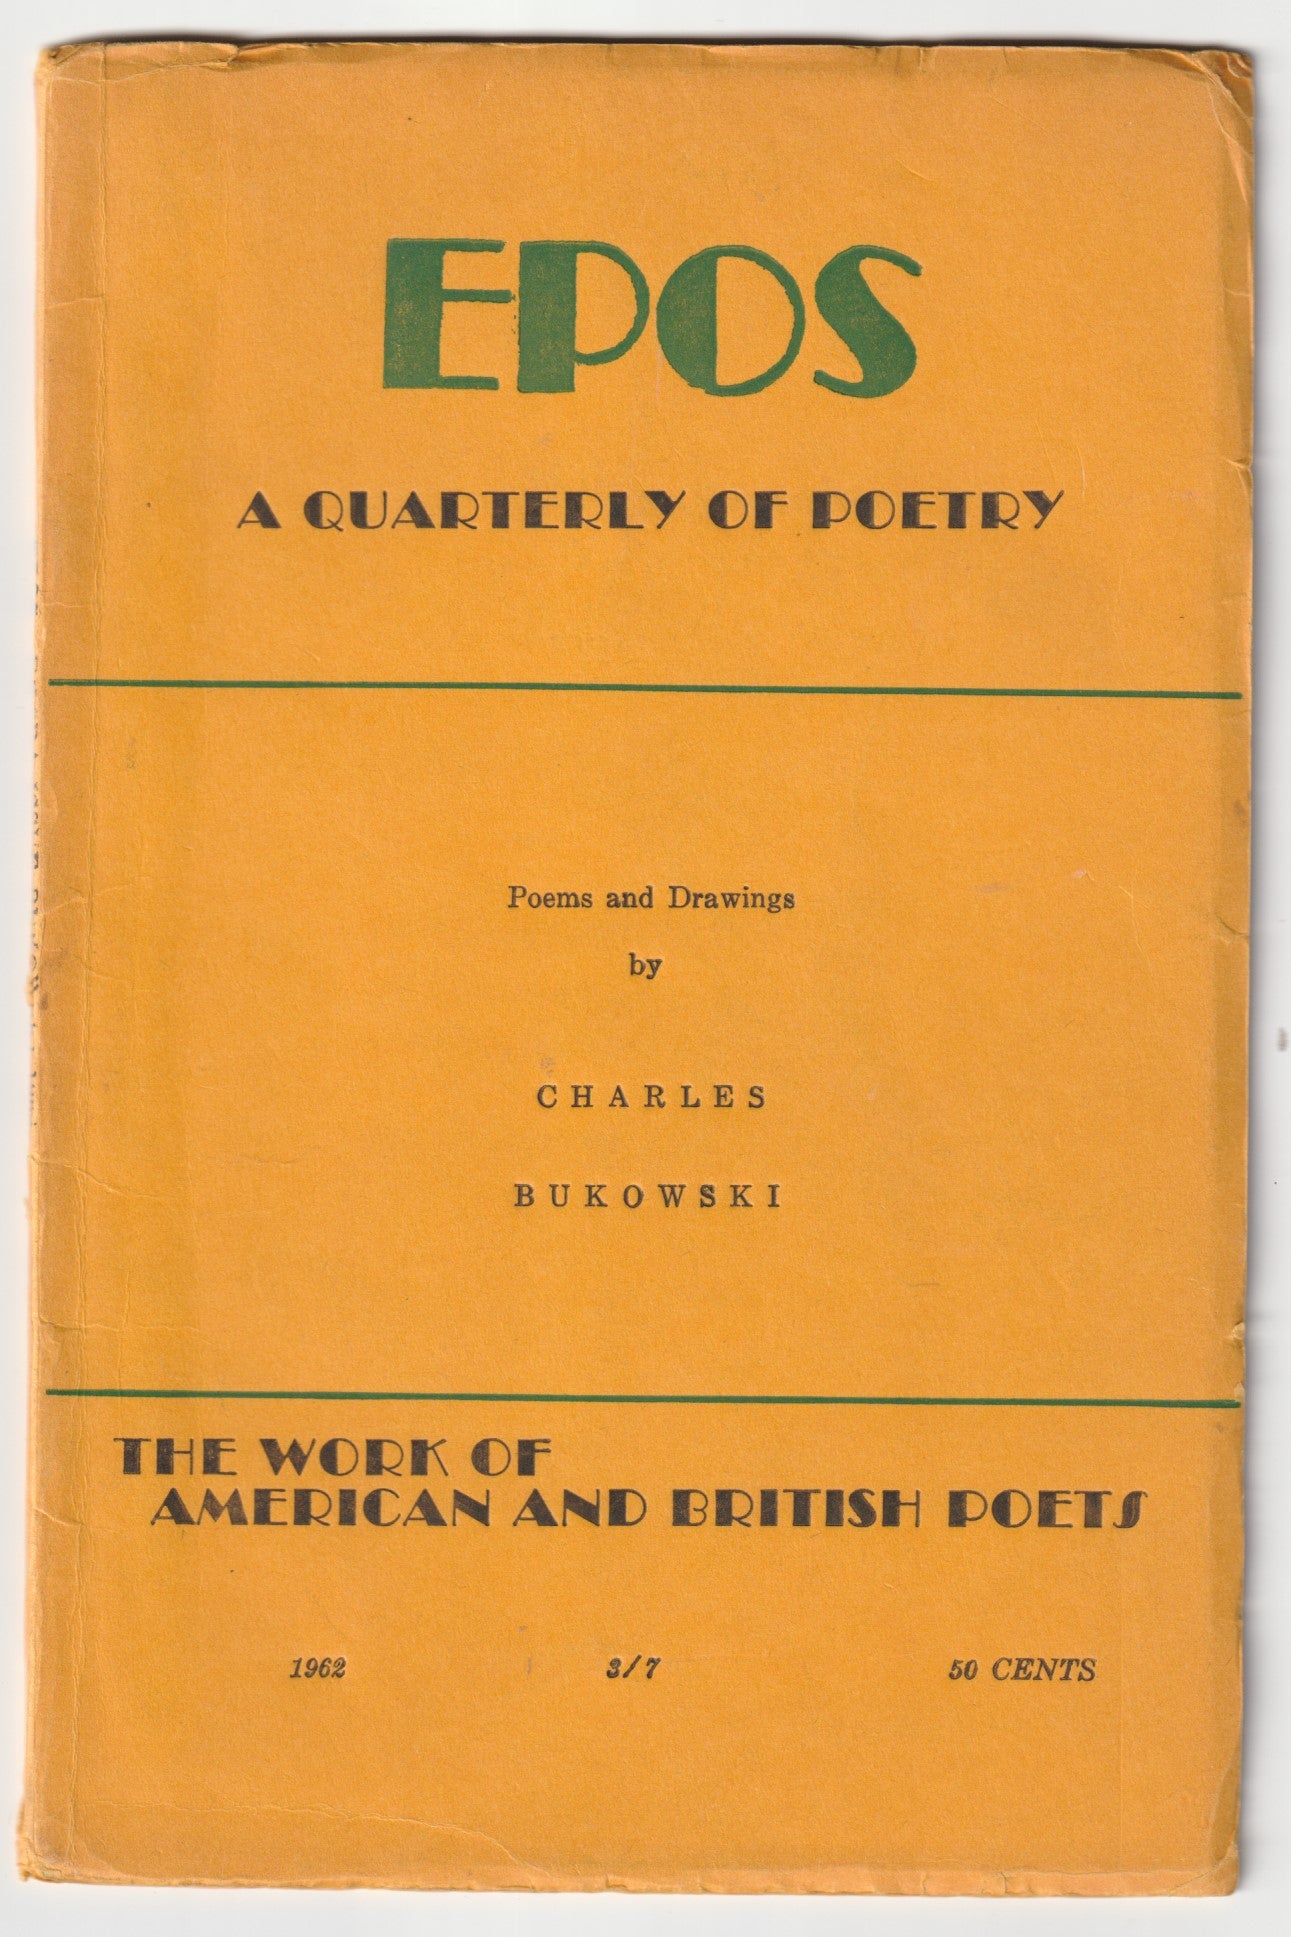 EPOS Extra Issue: Poems and Drawings (1962)